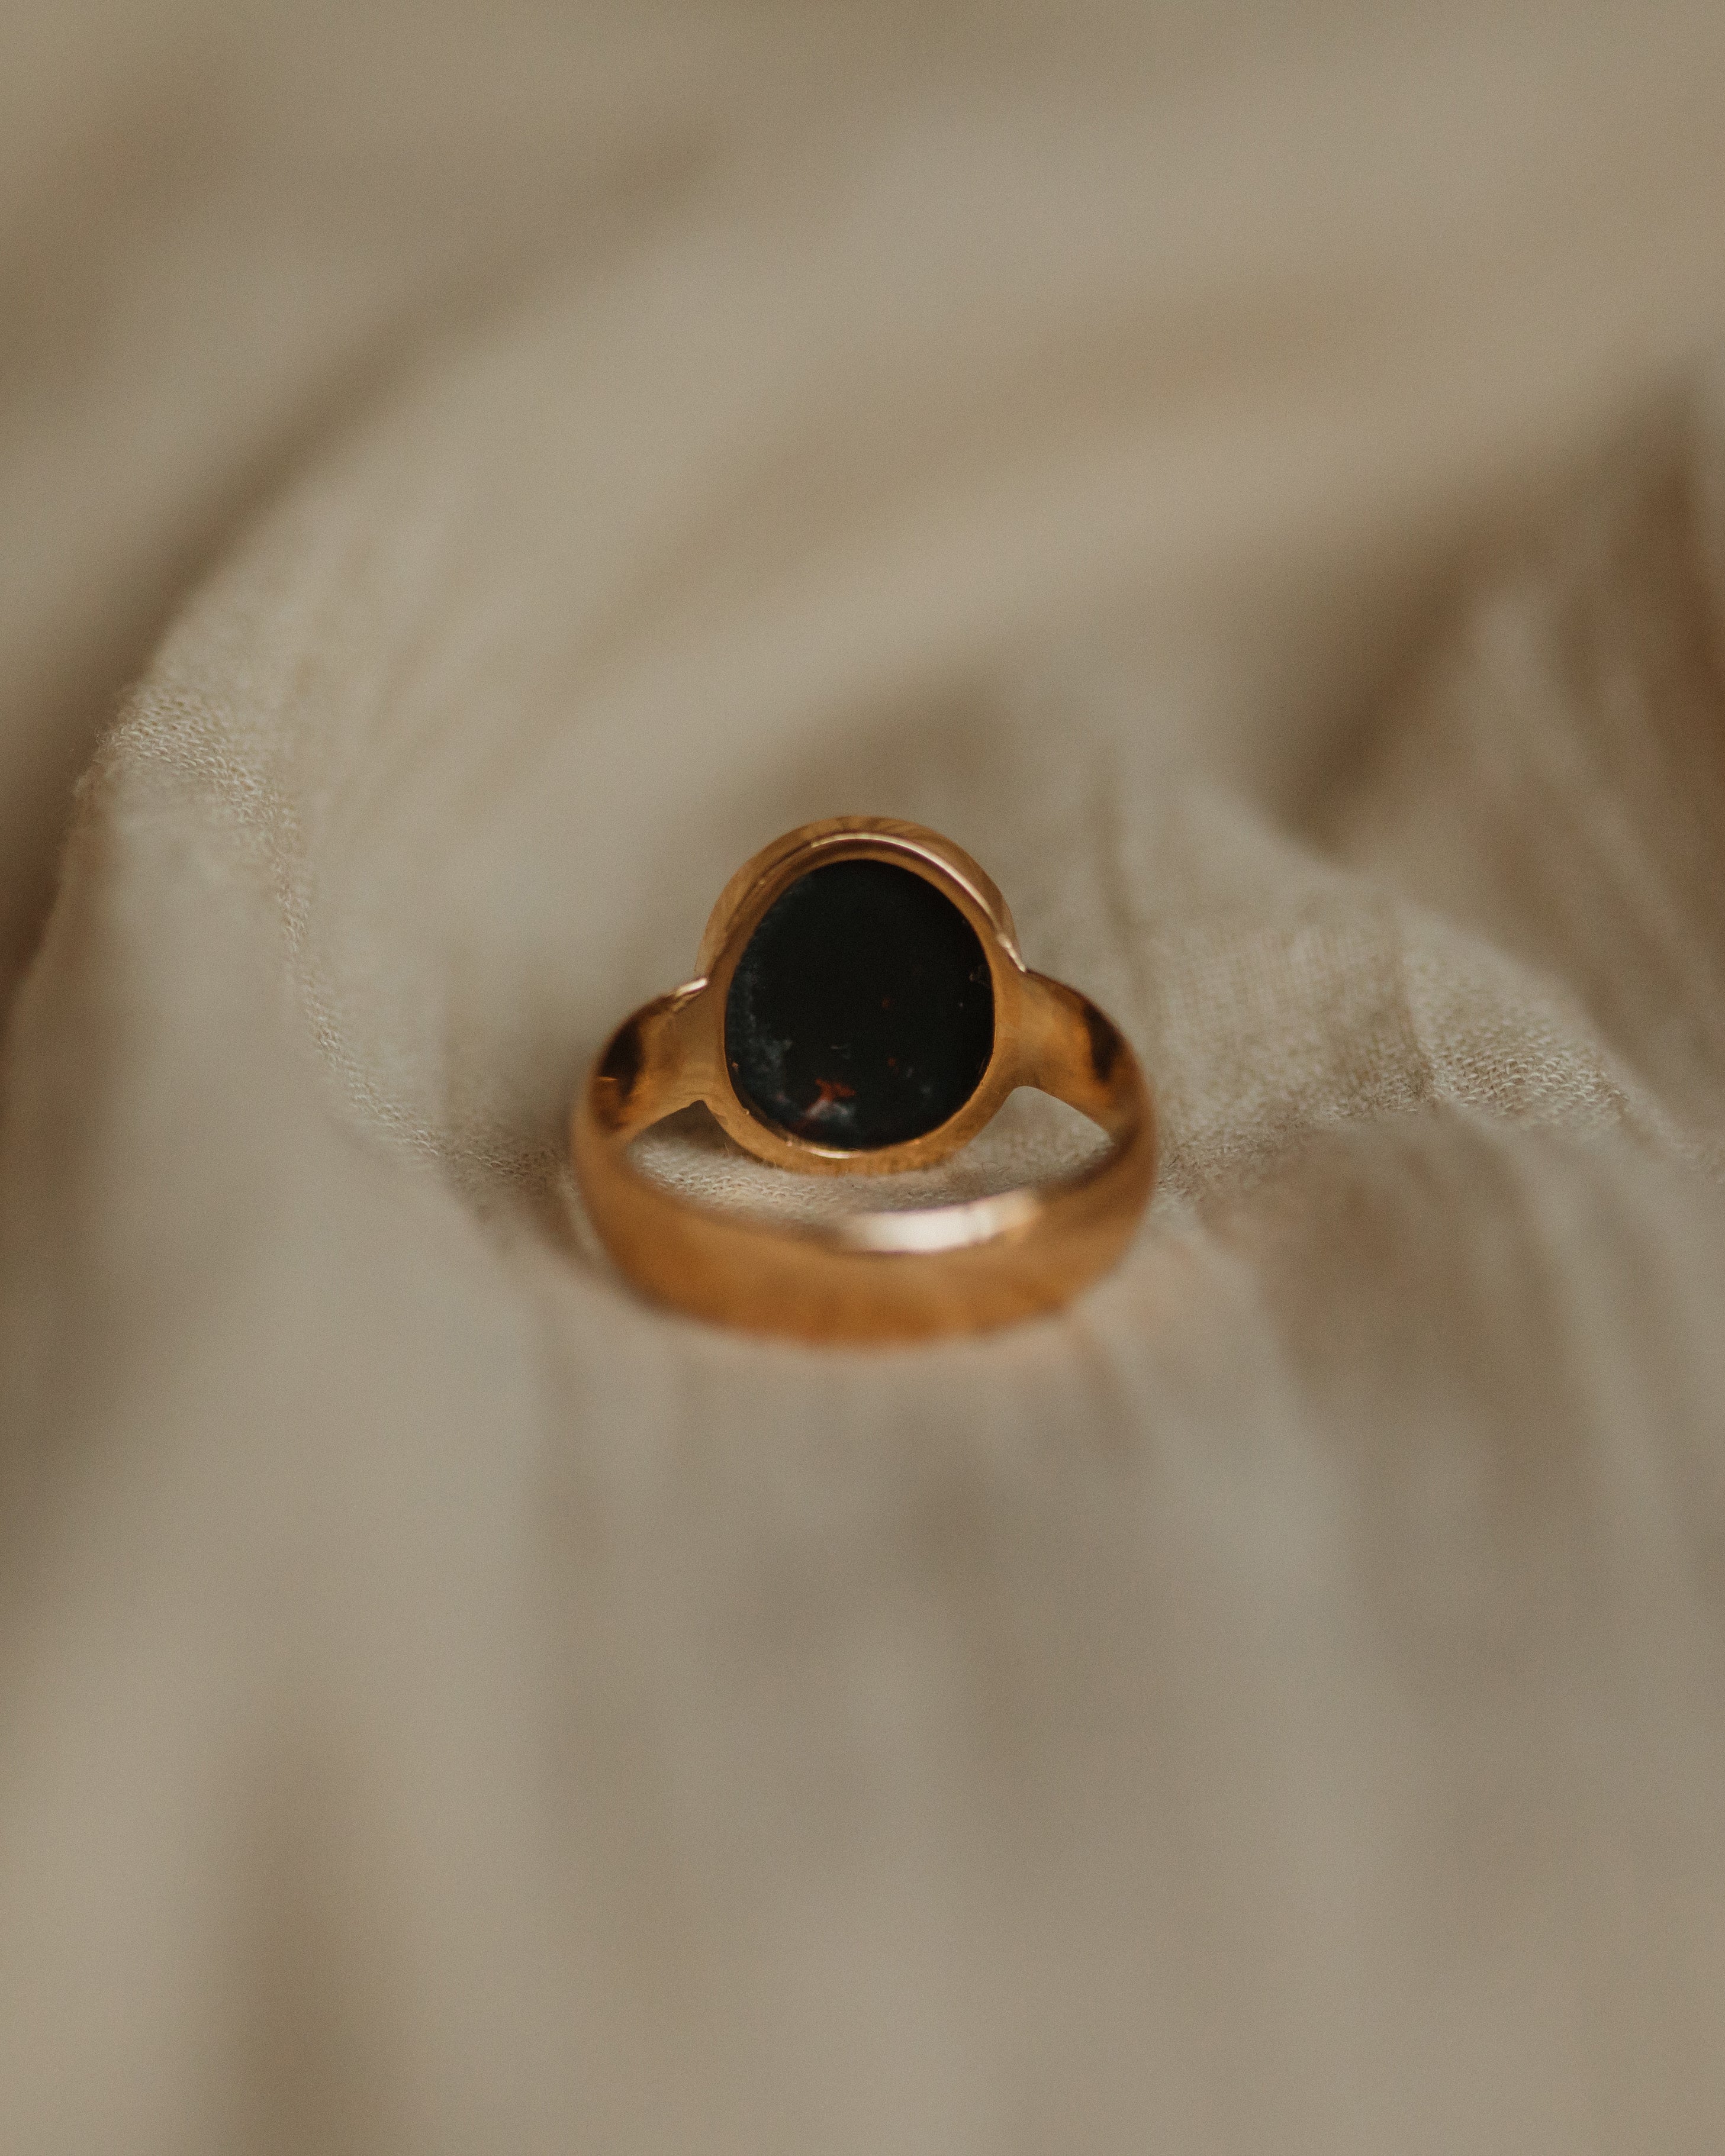 Maud 1884 Antique Victorian 22ct Gold Bloodstone Ring